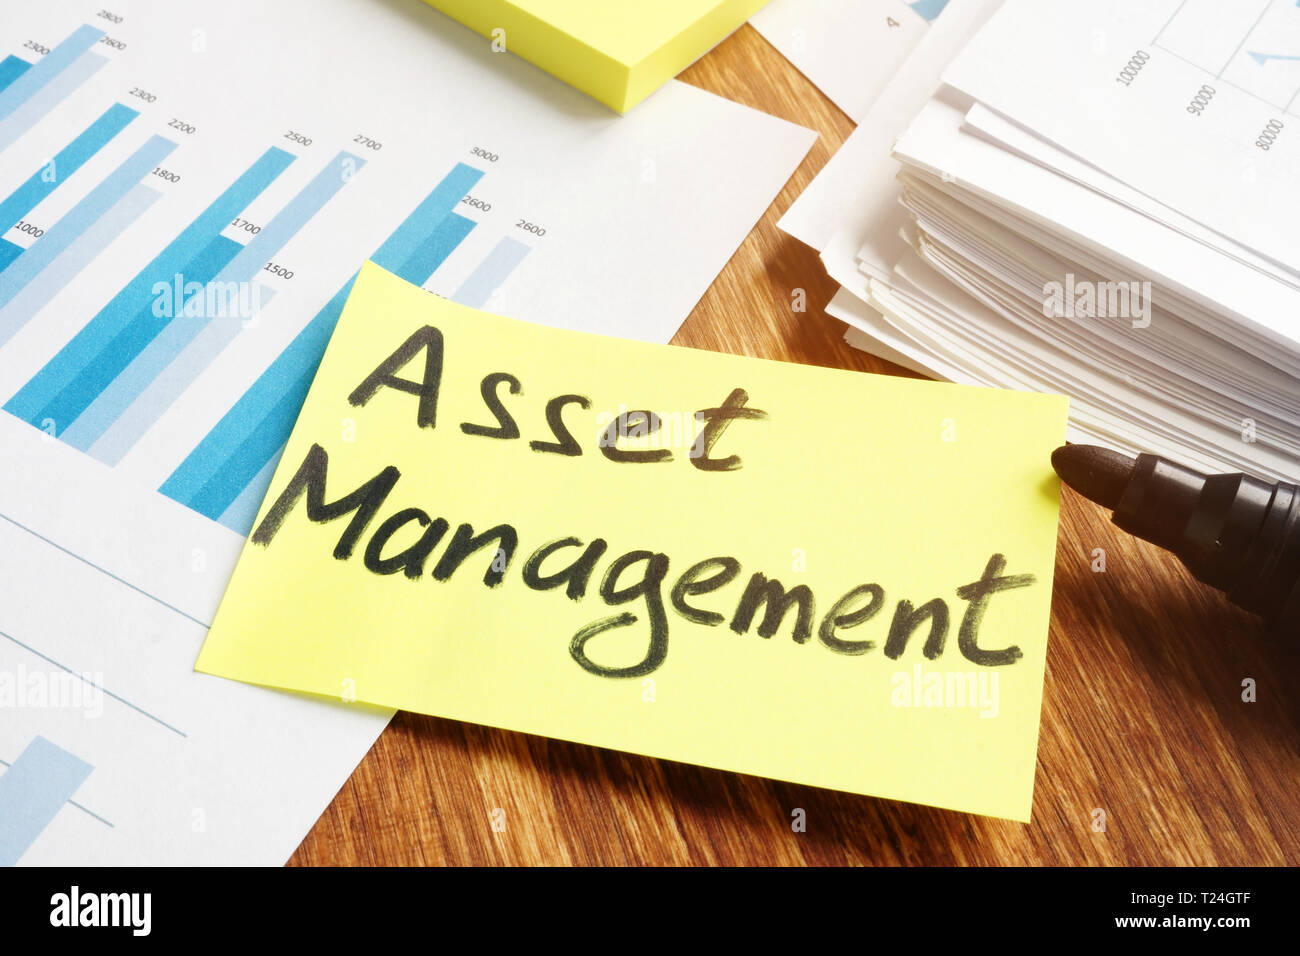 Asset management concept. Stack of business papers. Stock Photo